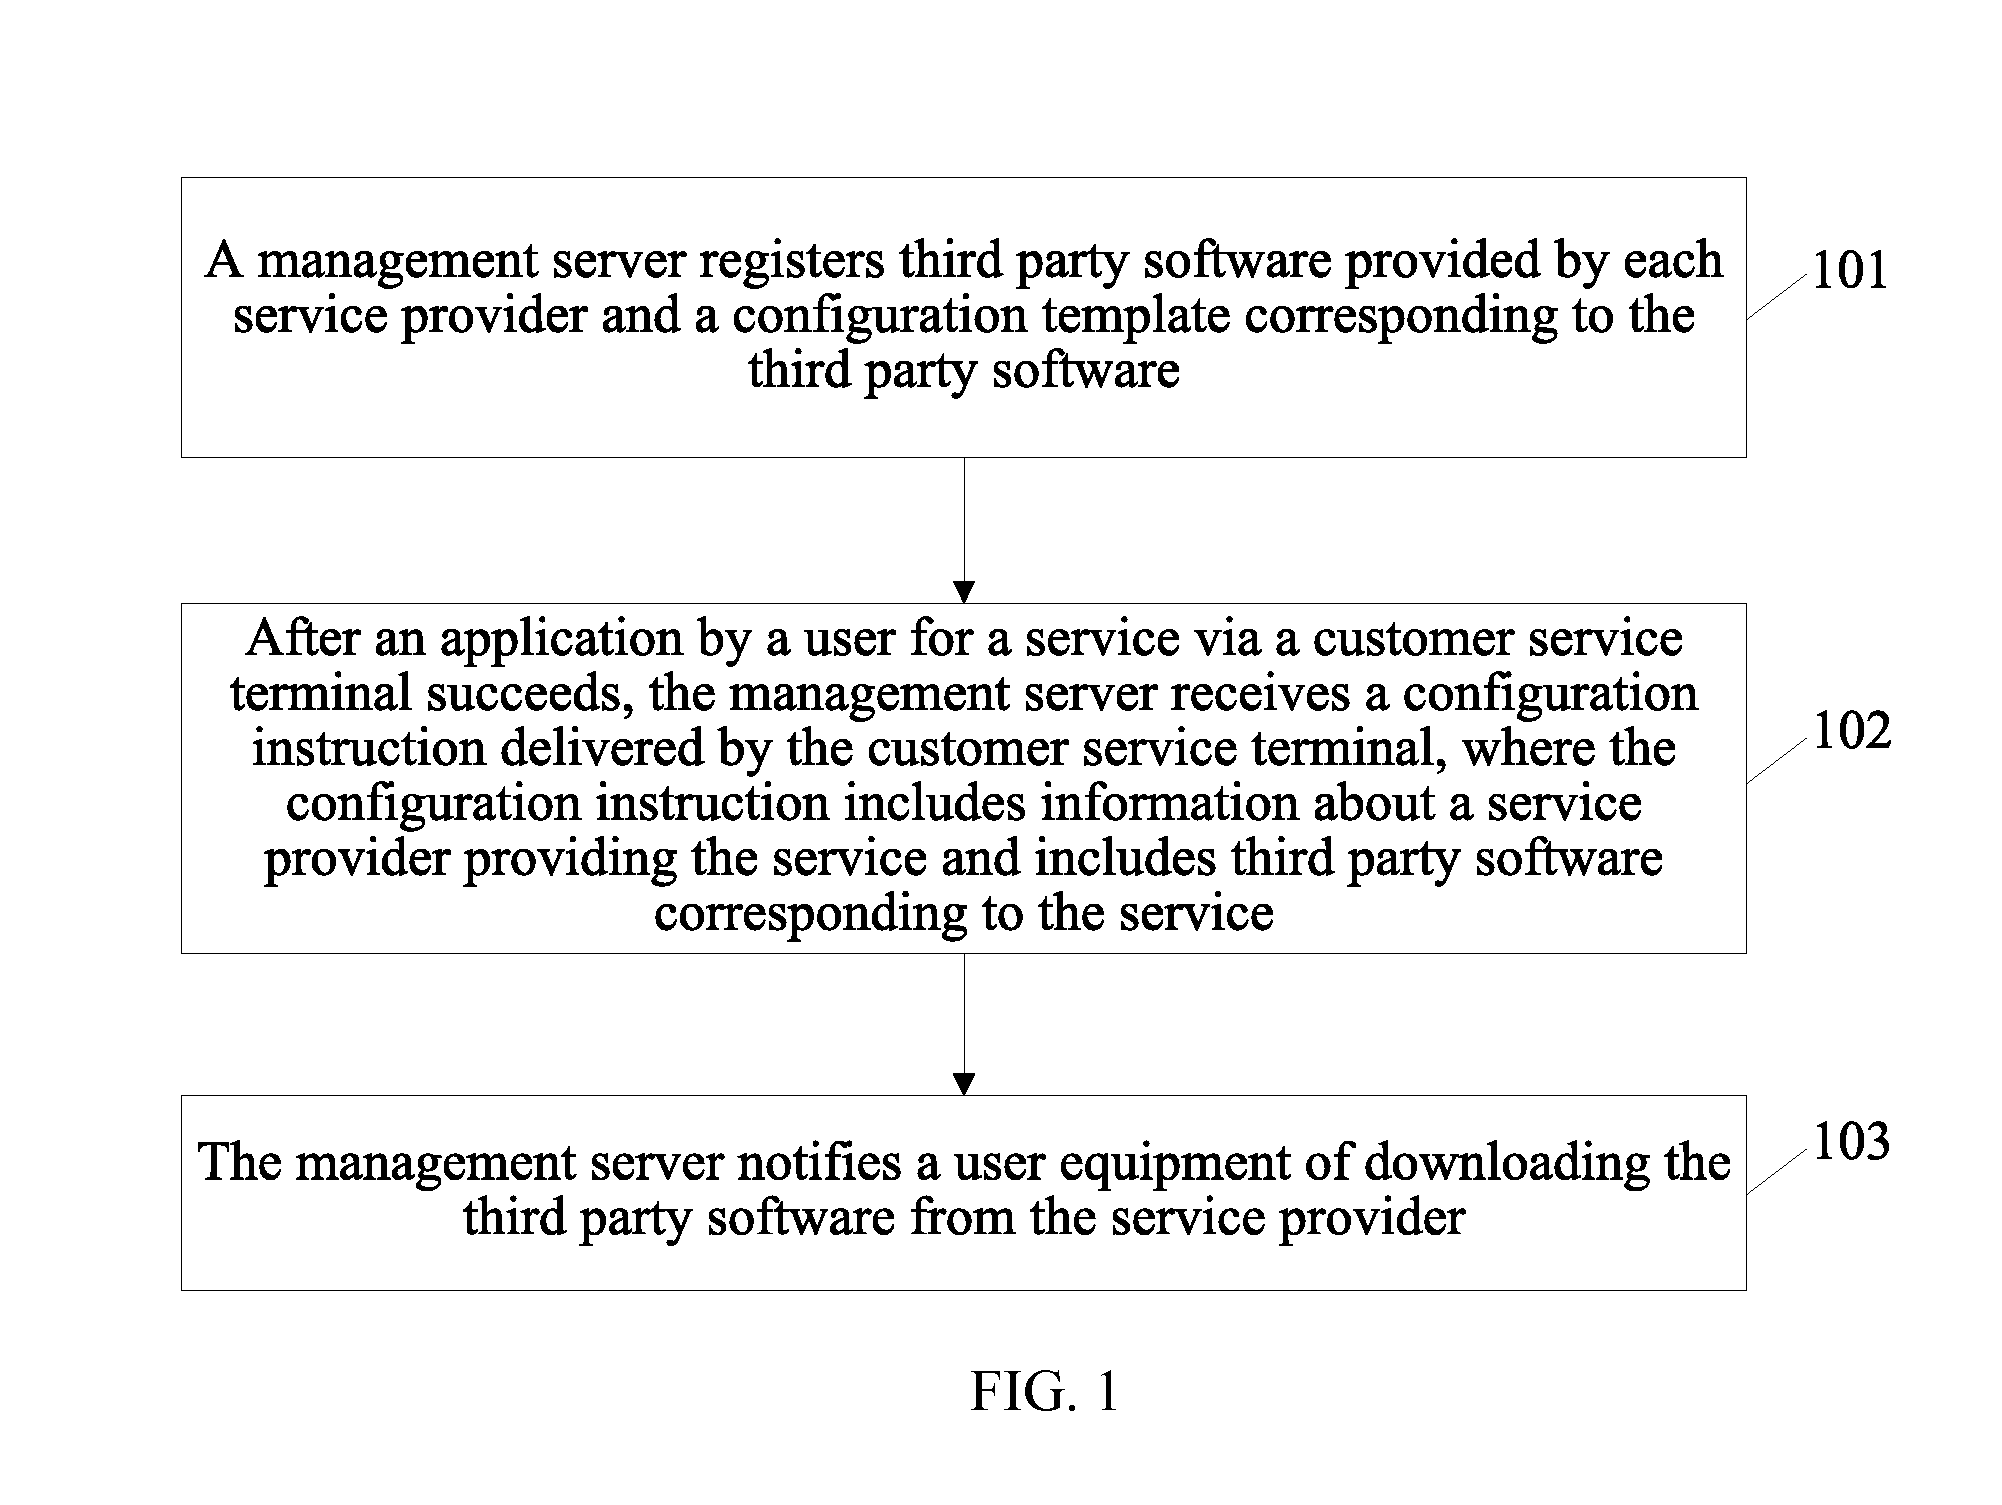 Method and System for Configuring and Managing Third Party Software, and Management Server